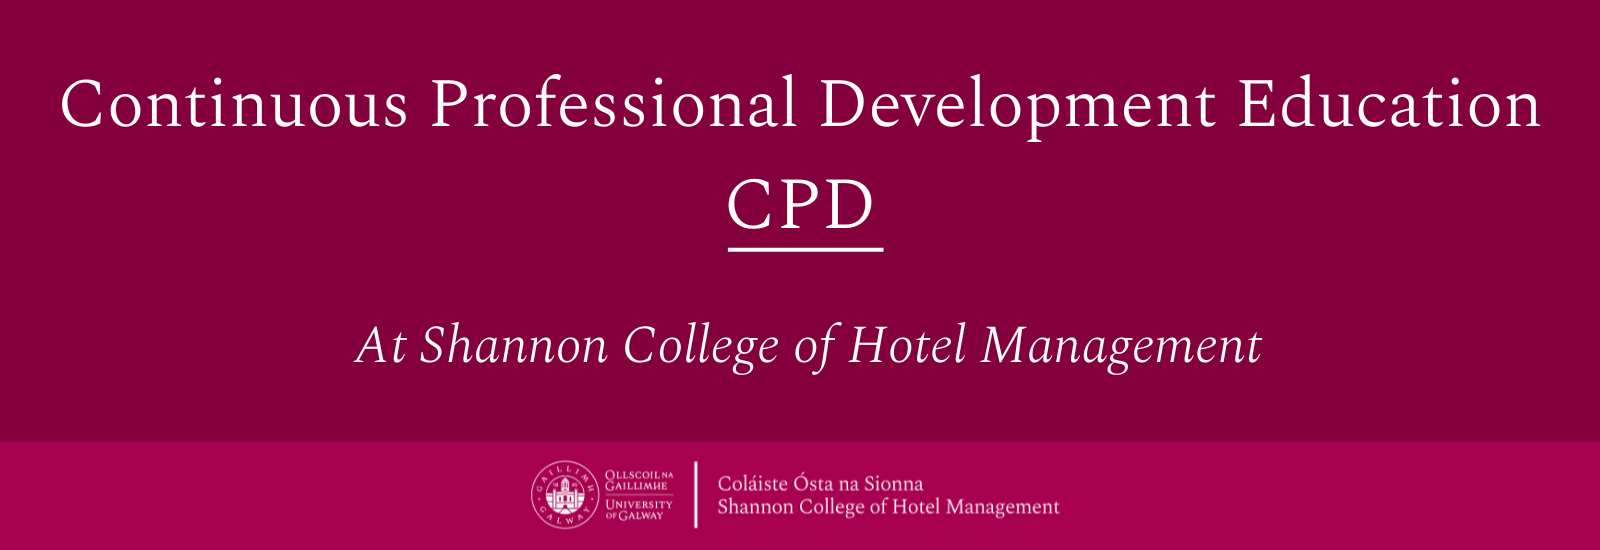 Continuous Professional Development CPD banner